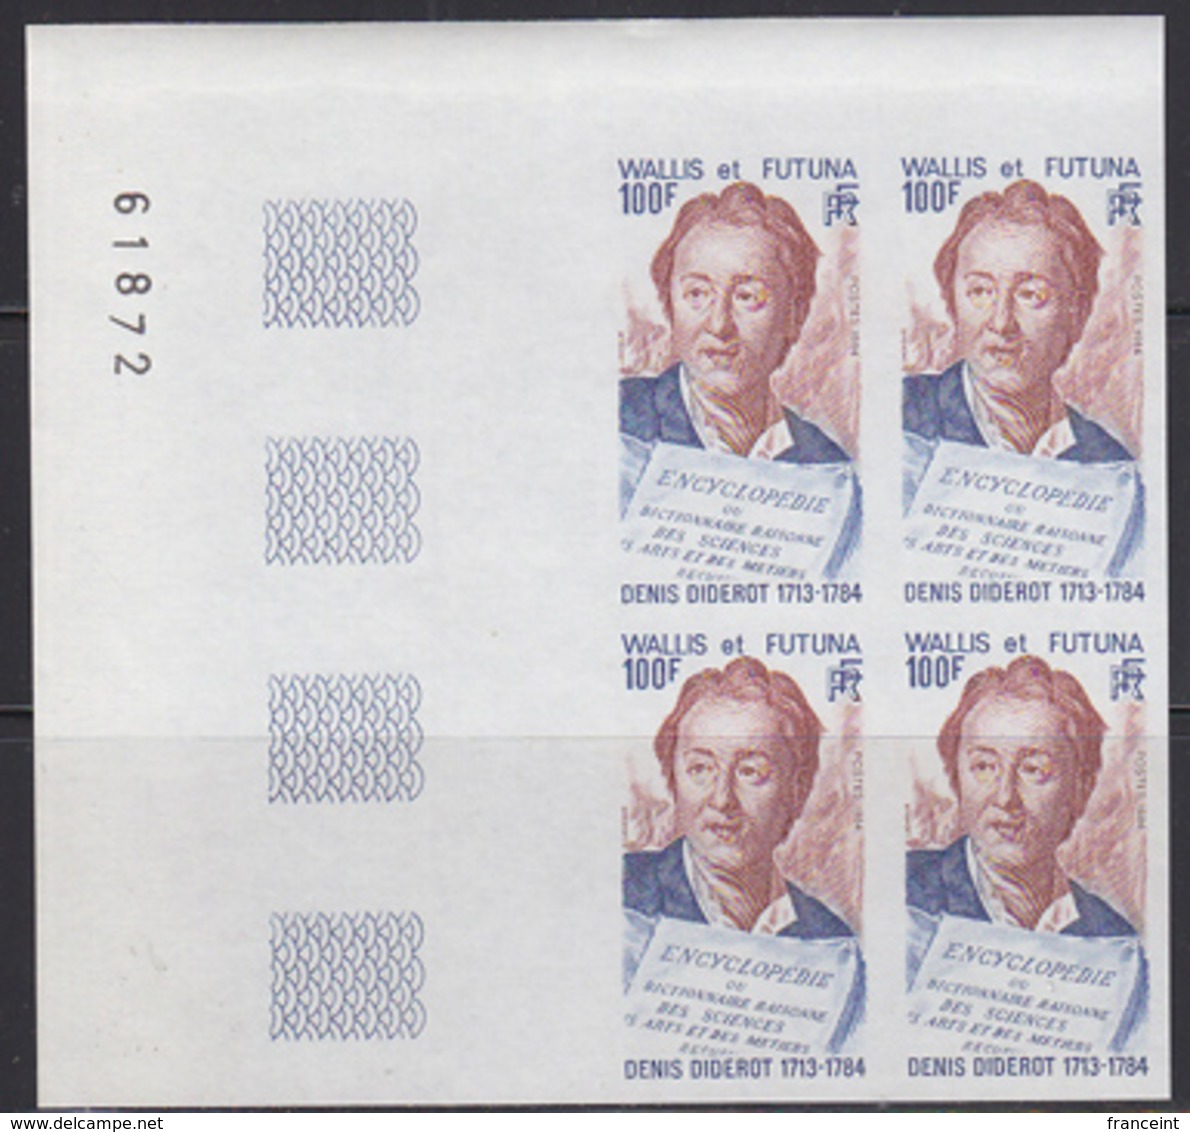 WALLIS & FUTUNA (1984) Diderot. Page Of Encyclopedia. Imperforate Corner Block Of 4. Scott No 316, Yvert No 319. - Imperforates, Proofs & Errors